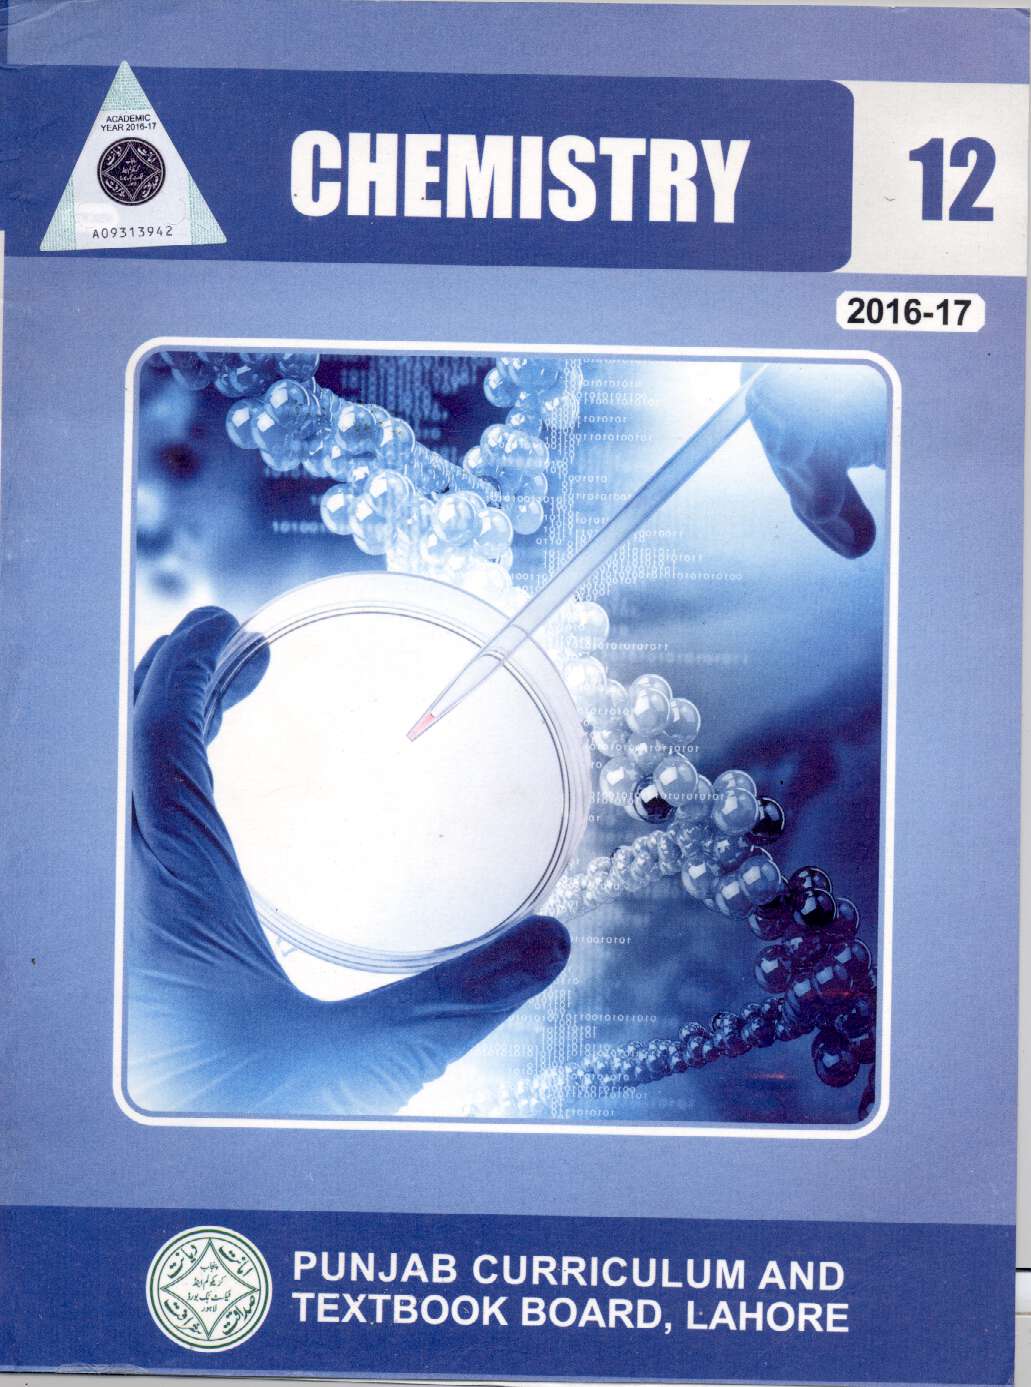 12 chemistry guide pdf download